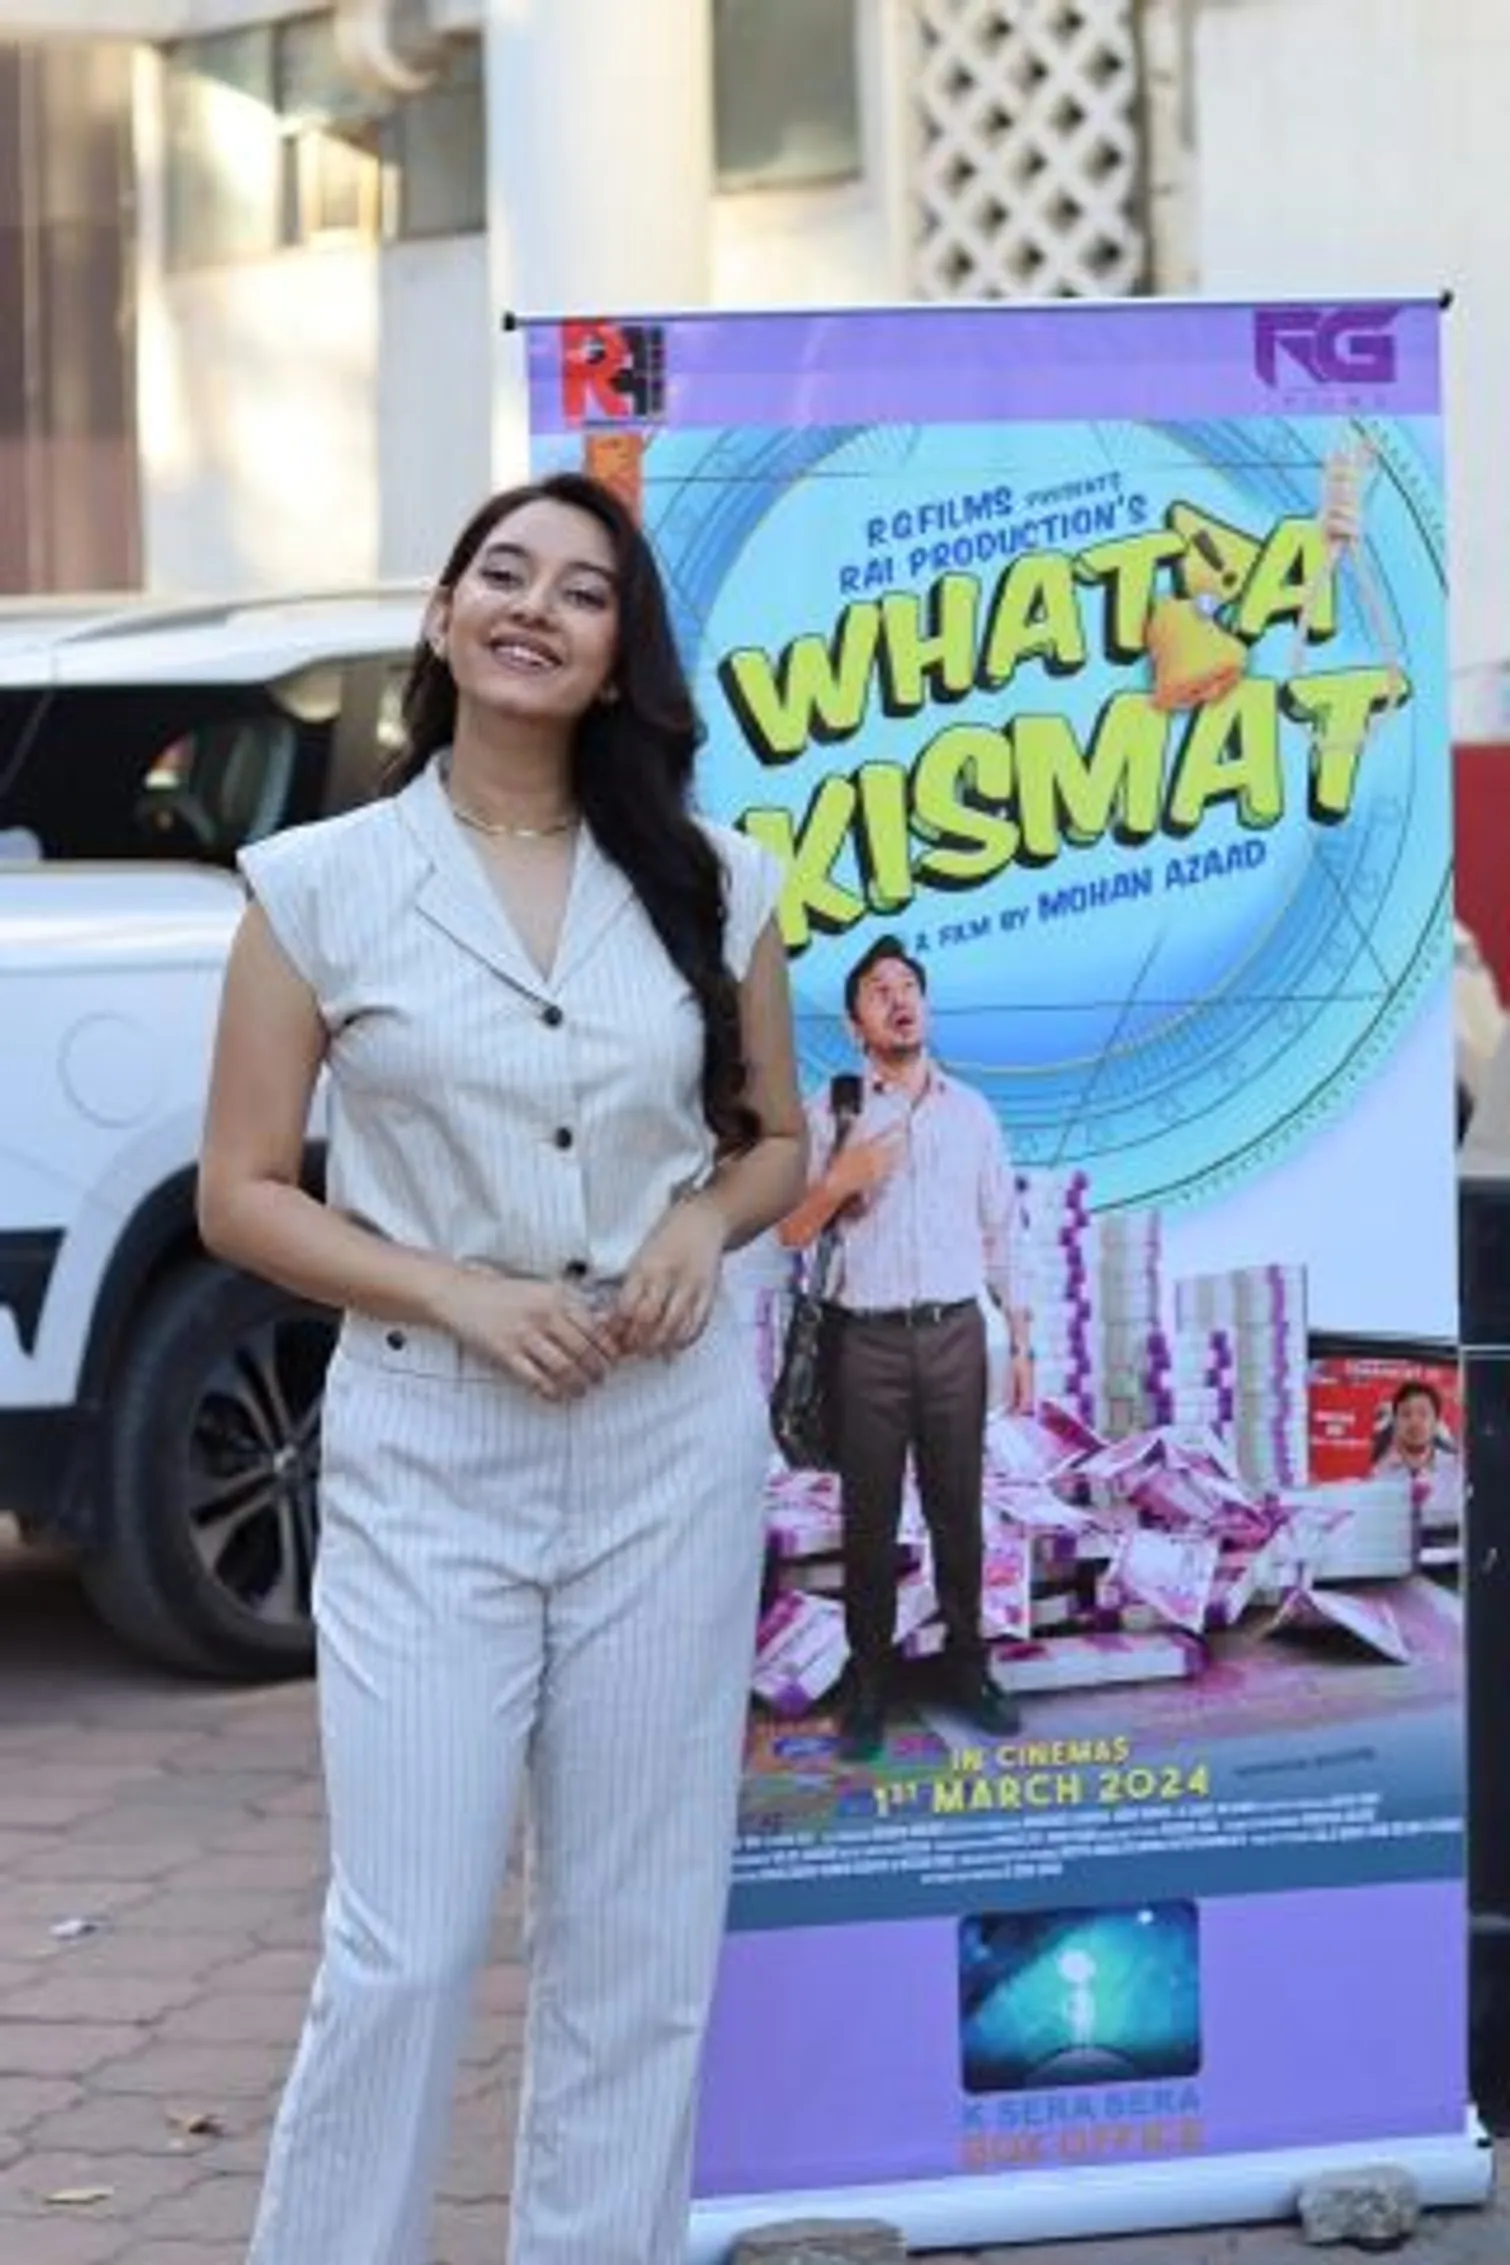 Vaishnavi stepping into Bollywood with this film